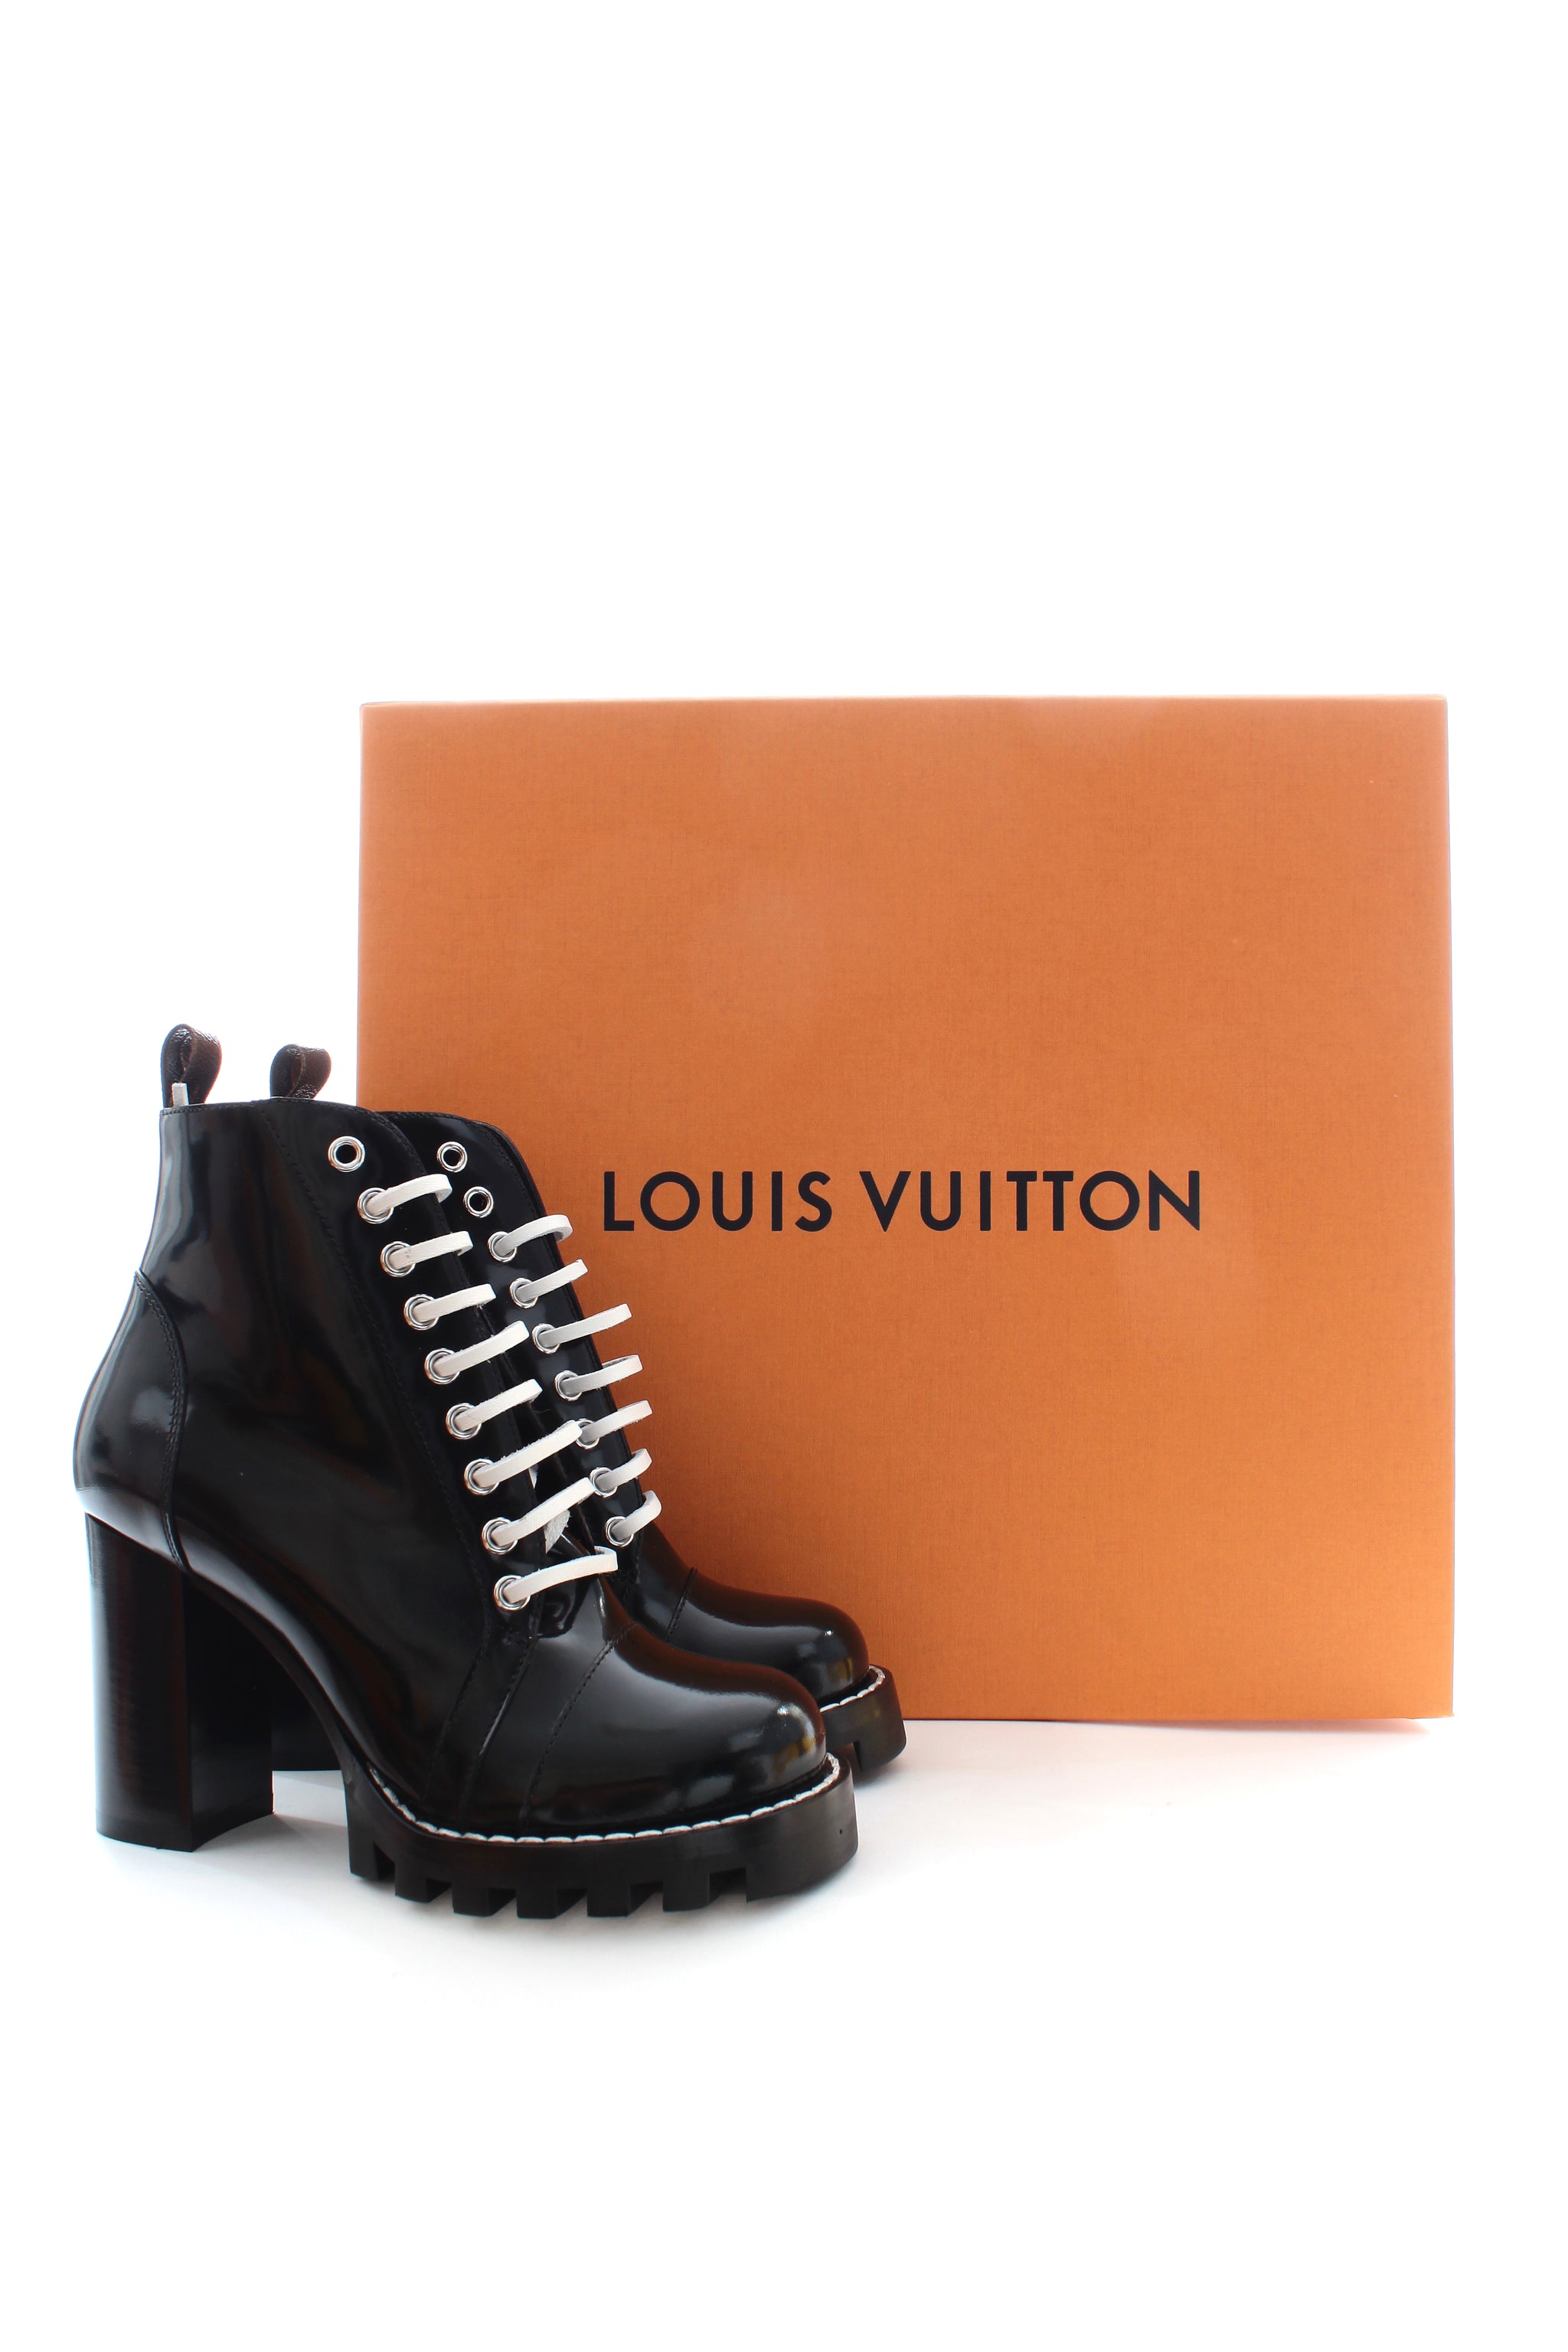 Star trail patent leather ankle boots Louis Vuitton Black size 40 EU in  Patent leather - 36899267